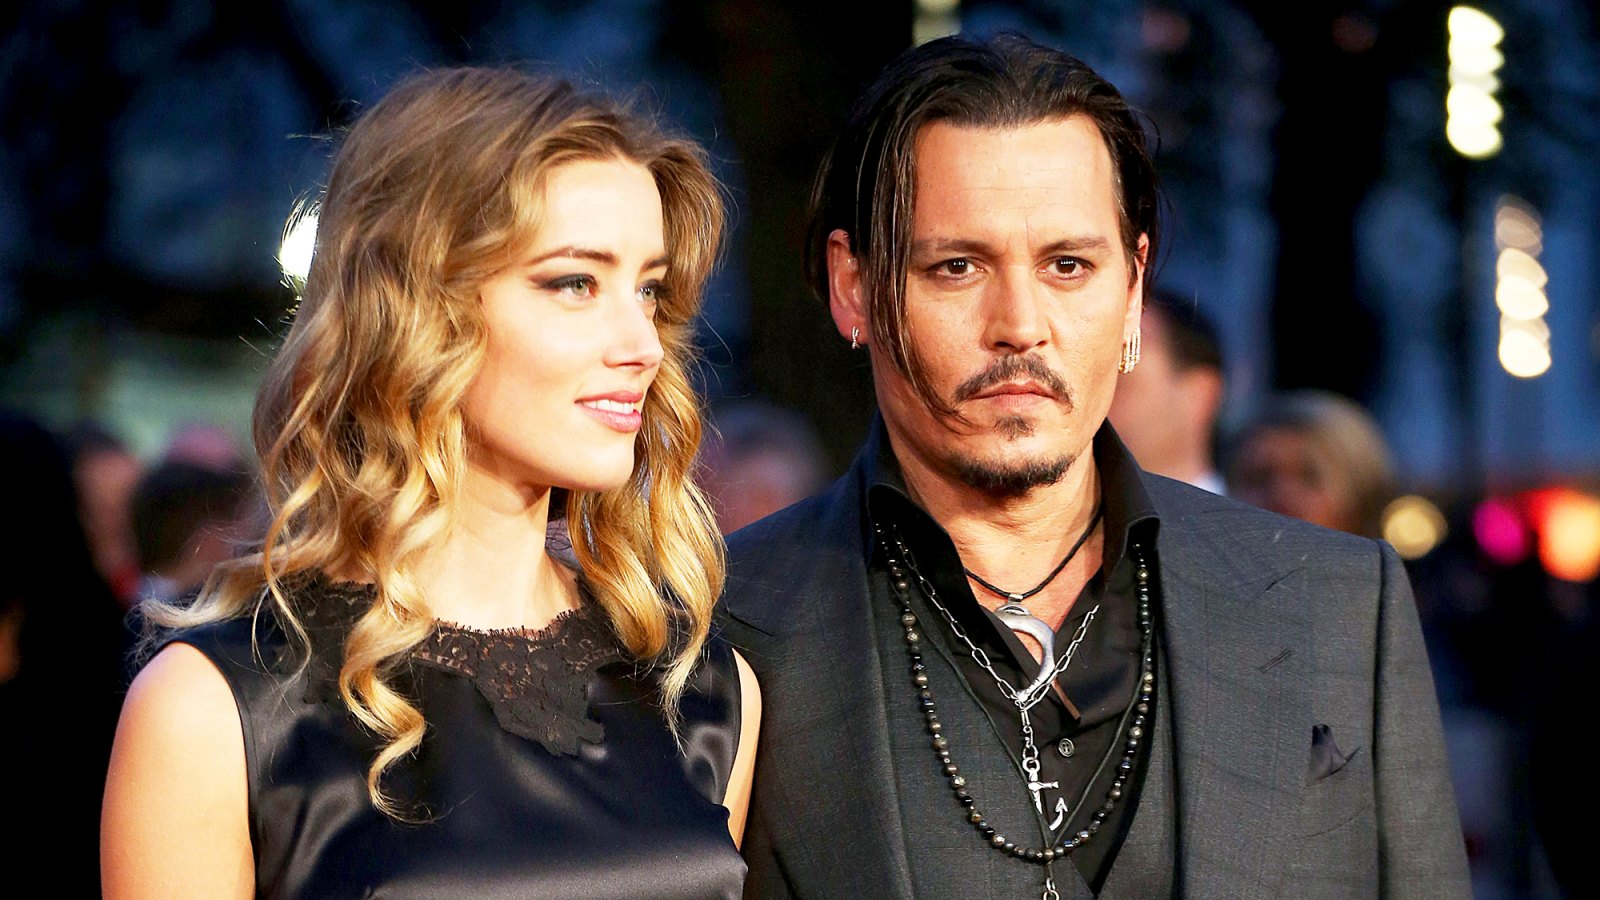 Amber Heard and Johnny Depp attend a screening of 'Black Mass' during the BFI London Film Festival at Odeon Leicester Square in London, England.